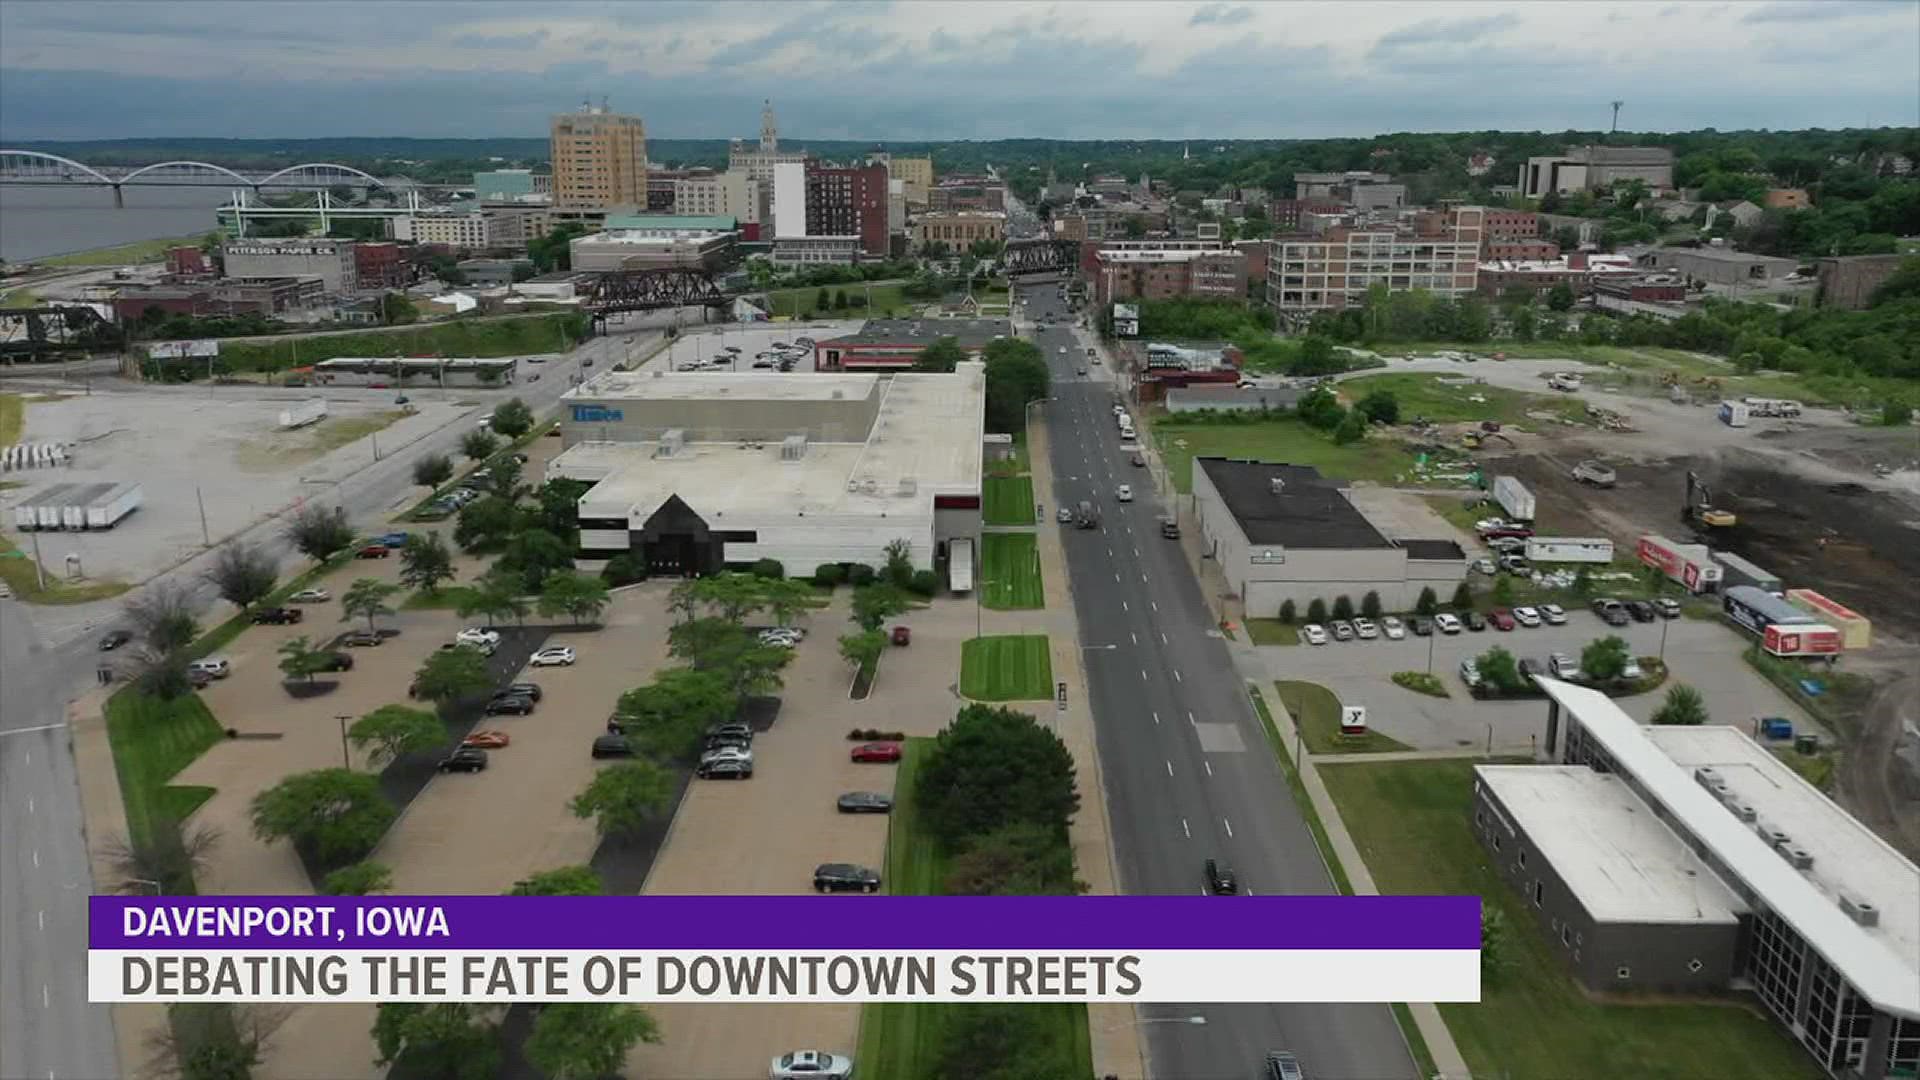 The City of Davenport on Saturday, April 2 held its final public input session on the conversion of 3rd and 4th streets from one-way to two-way traffic.